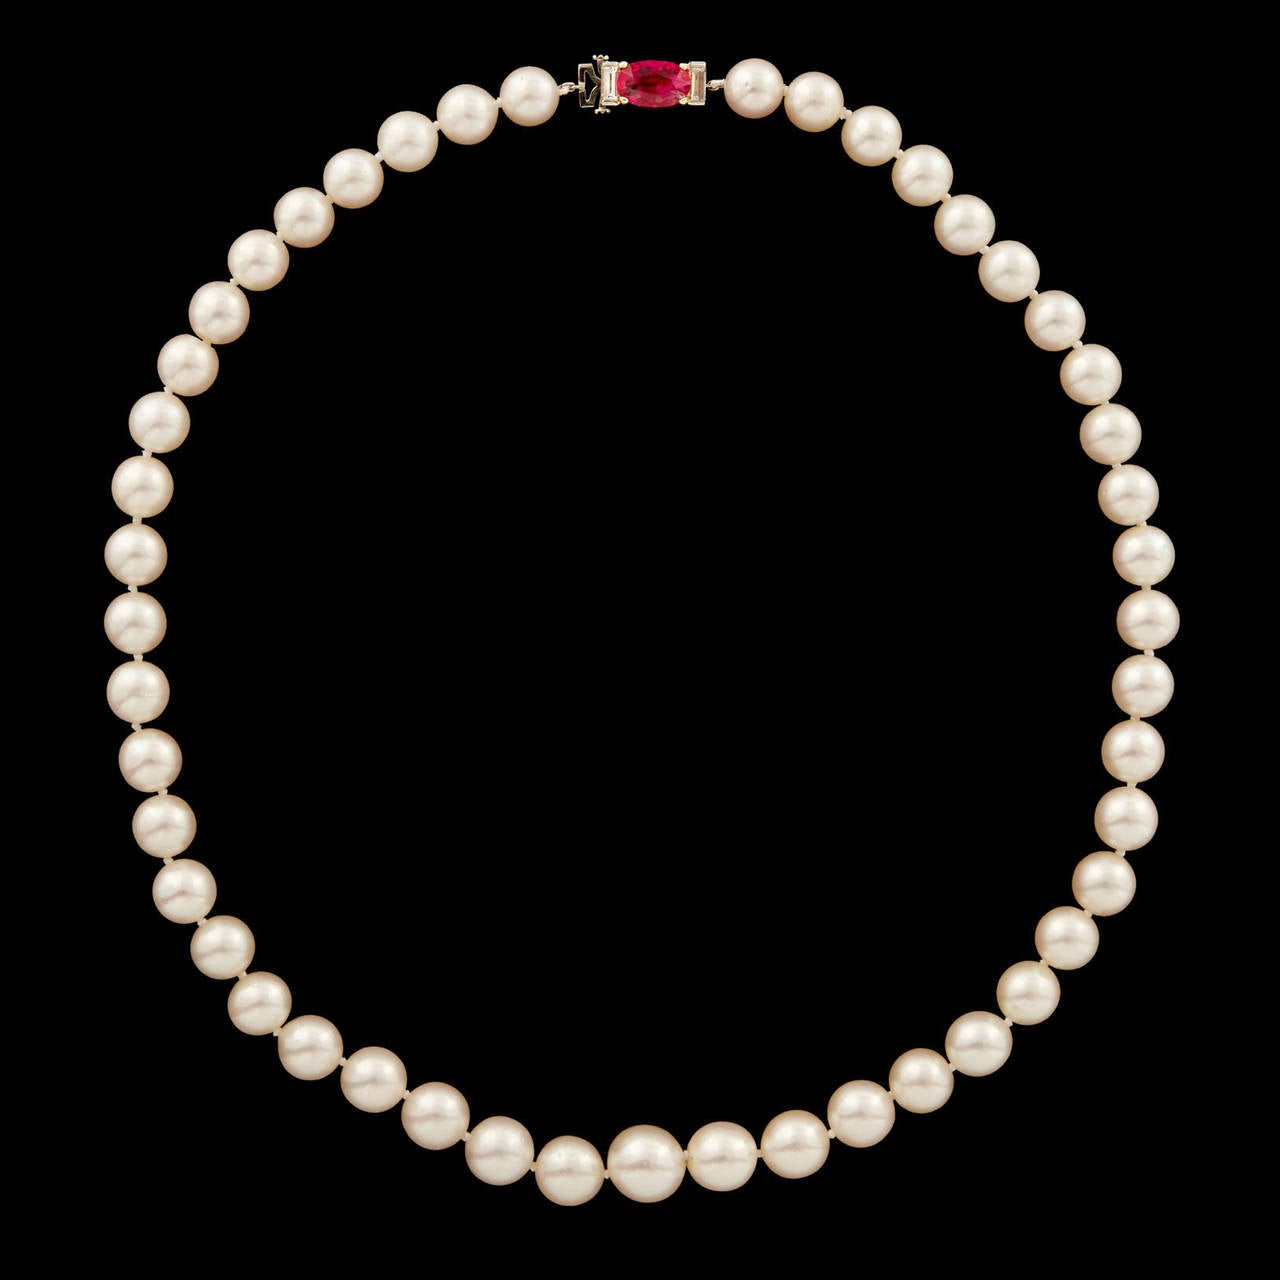 Vintage Van Cleef & Arpels Akoya Pearl Necklace Featuring a GIA Graded Oval Cut Natural Ruby Clasp with No Indications of Heating.  The approximately 1.45 carat ruby is set in 18kt yellow gold prongs and flanked by two fine quality step cut diamonds